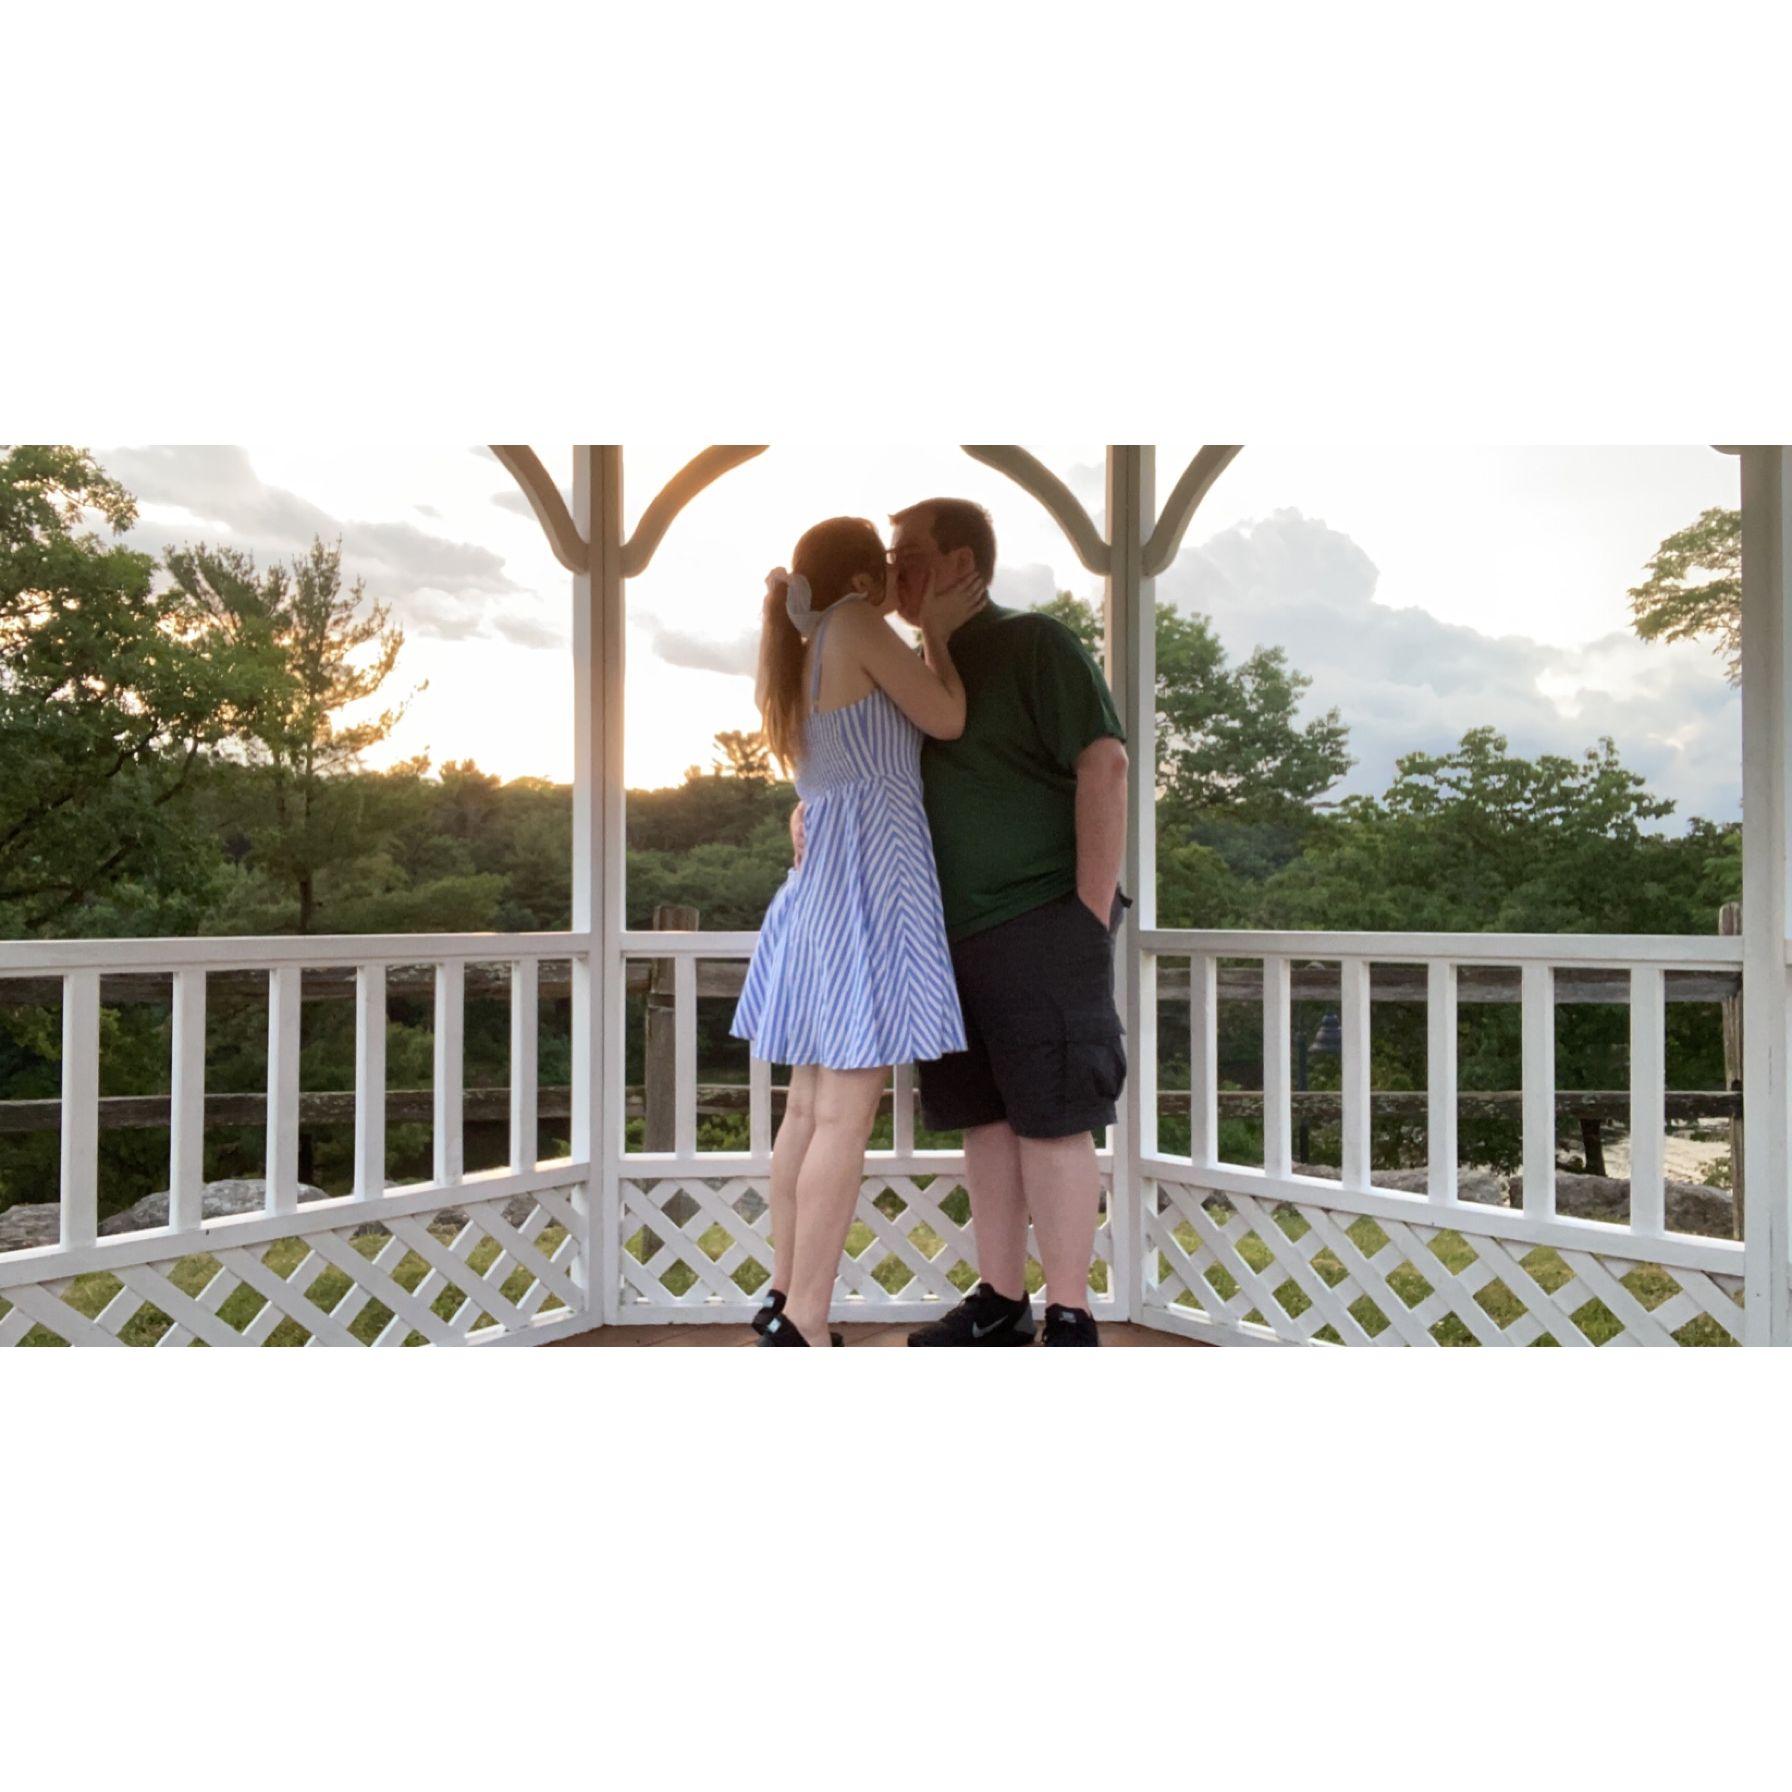 Our favorite photo of us, taken where Justin would later propose